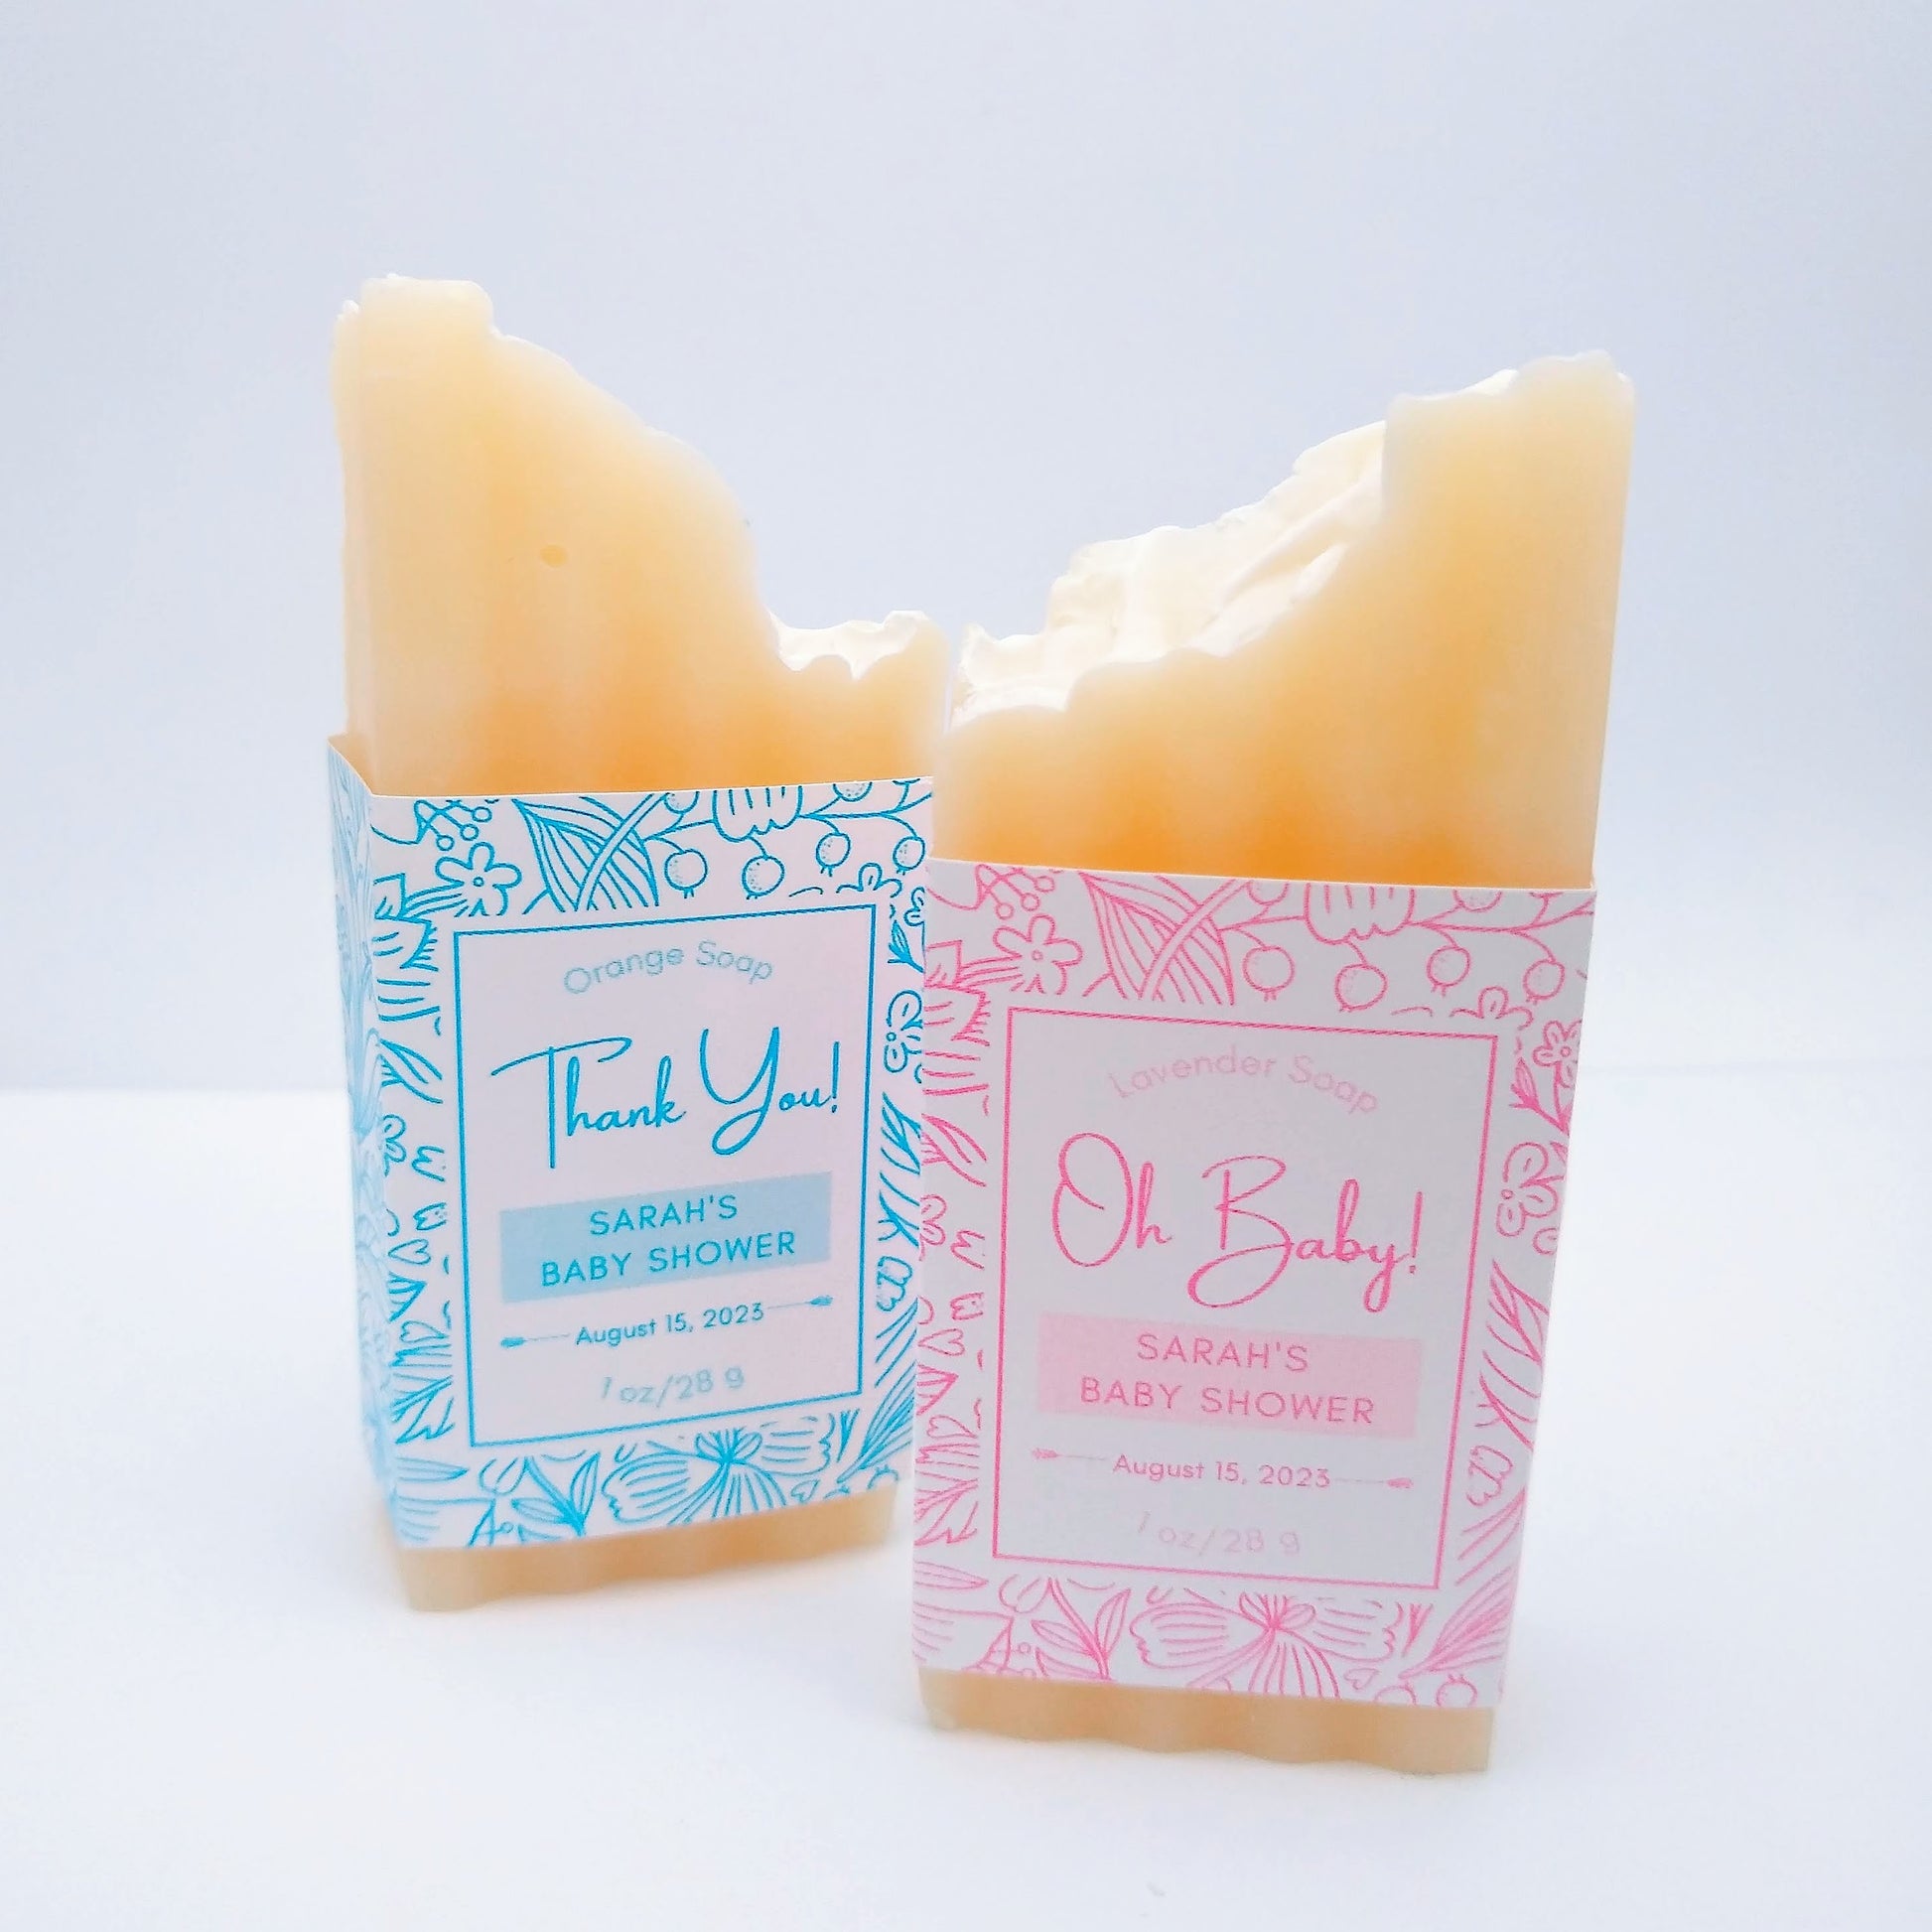 2 mini bar of cream-colored soap with one with a baby blue label printed with Thank You!, Sarah's Baby Shower, August 15, 2023. The second printed with Oh Baby!, Sarah's Baby Shower, August 15, 2023